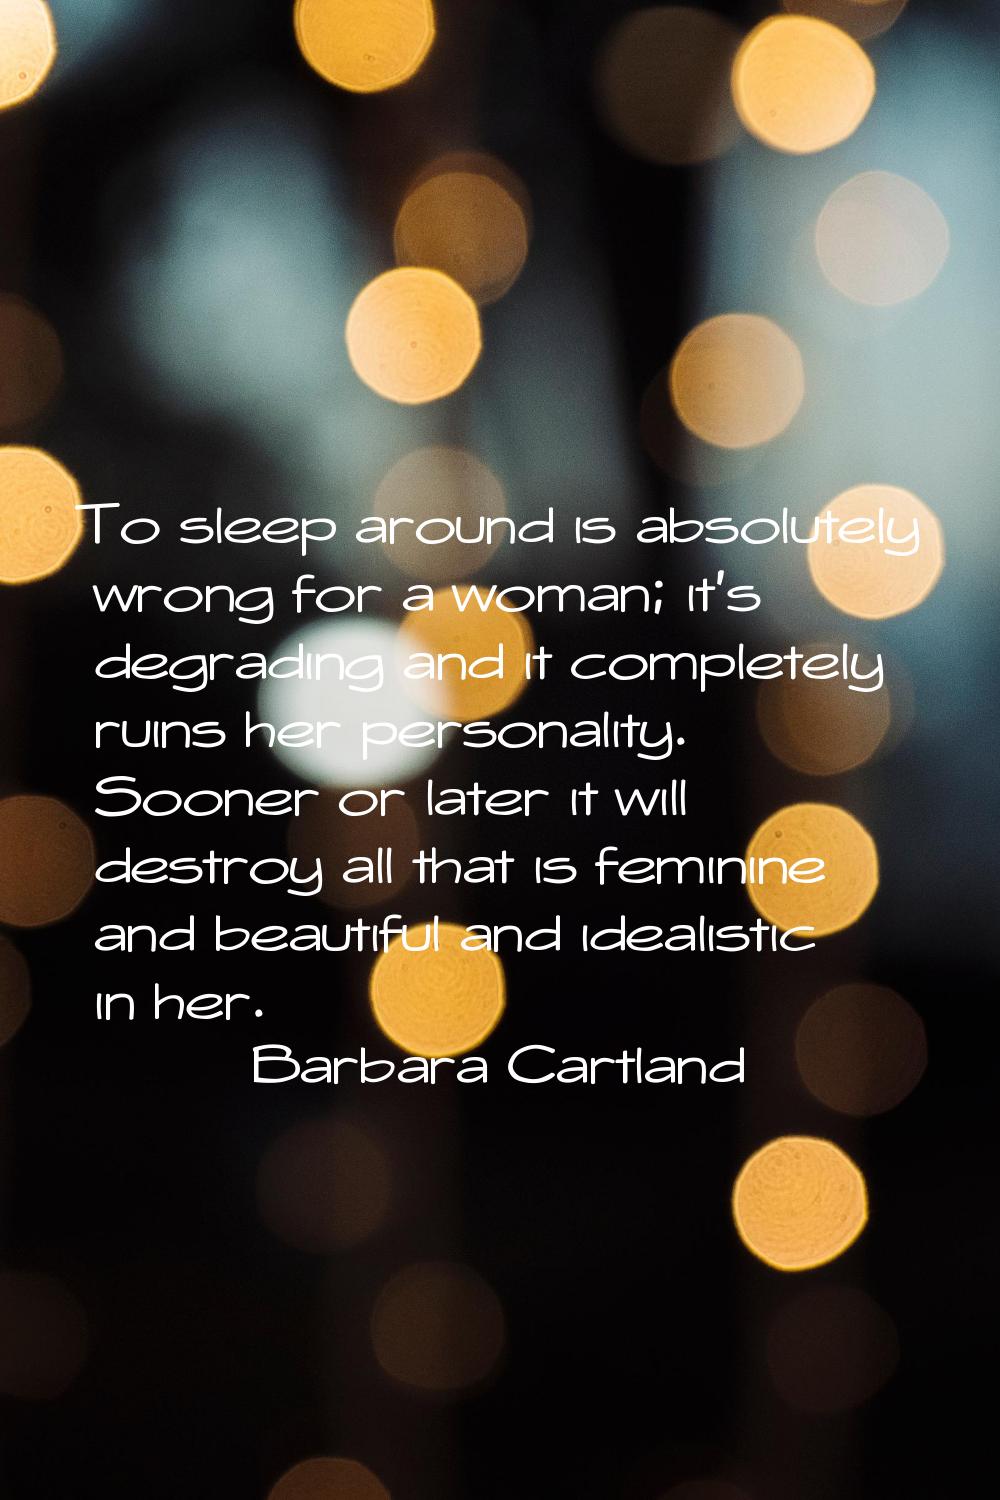 To sleep around is absolutely wrong for a woman; it's degrading and it completely ruins her persona